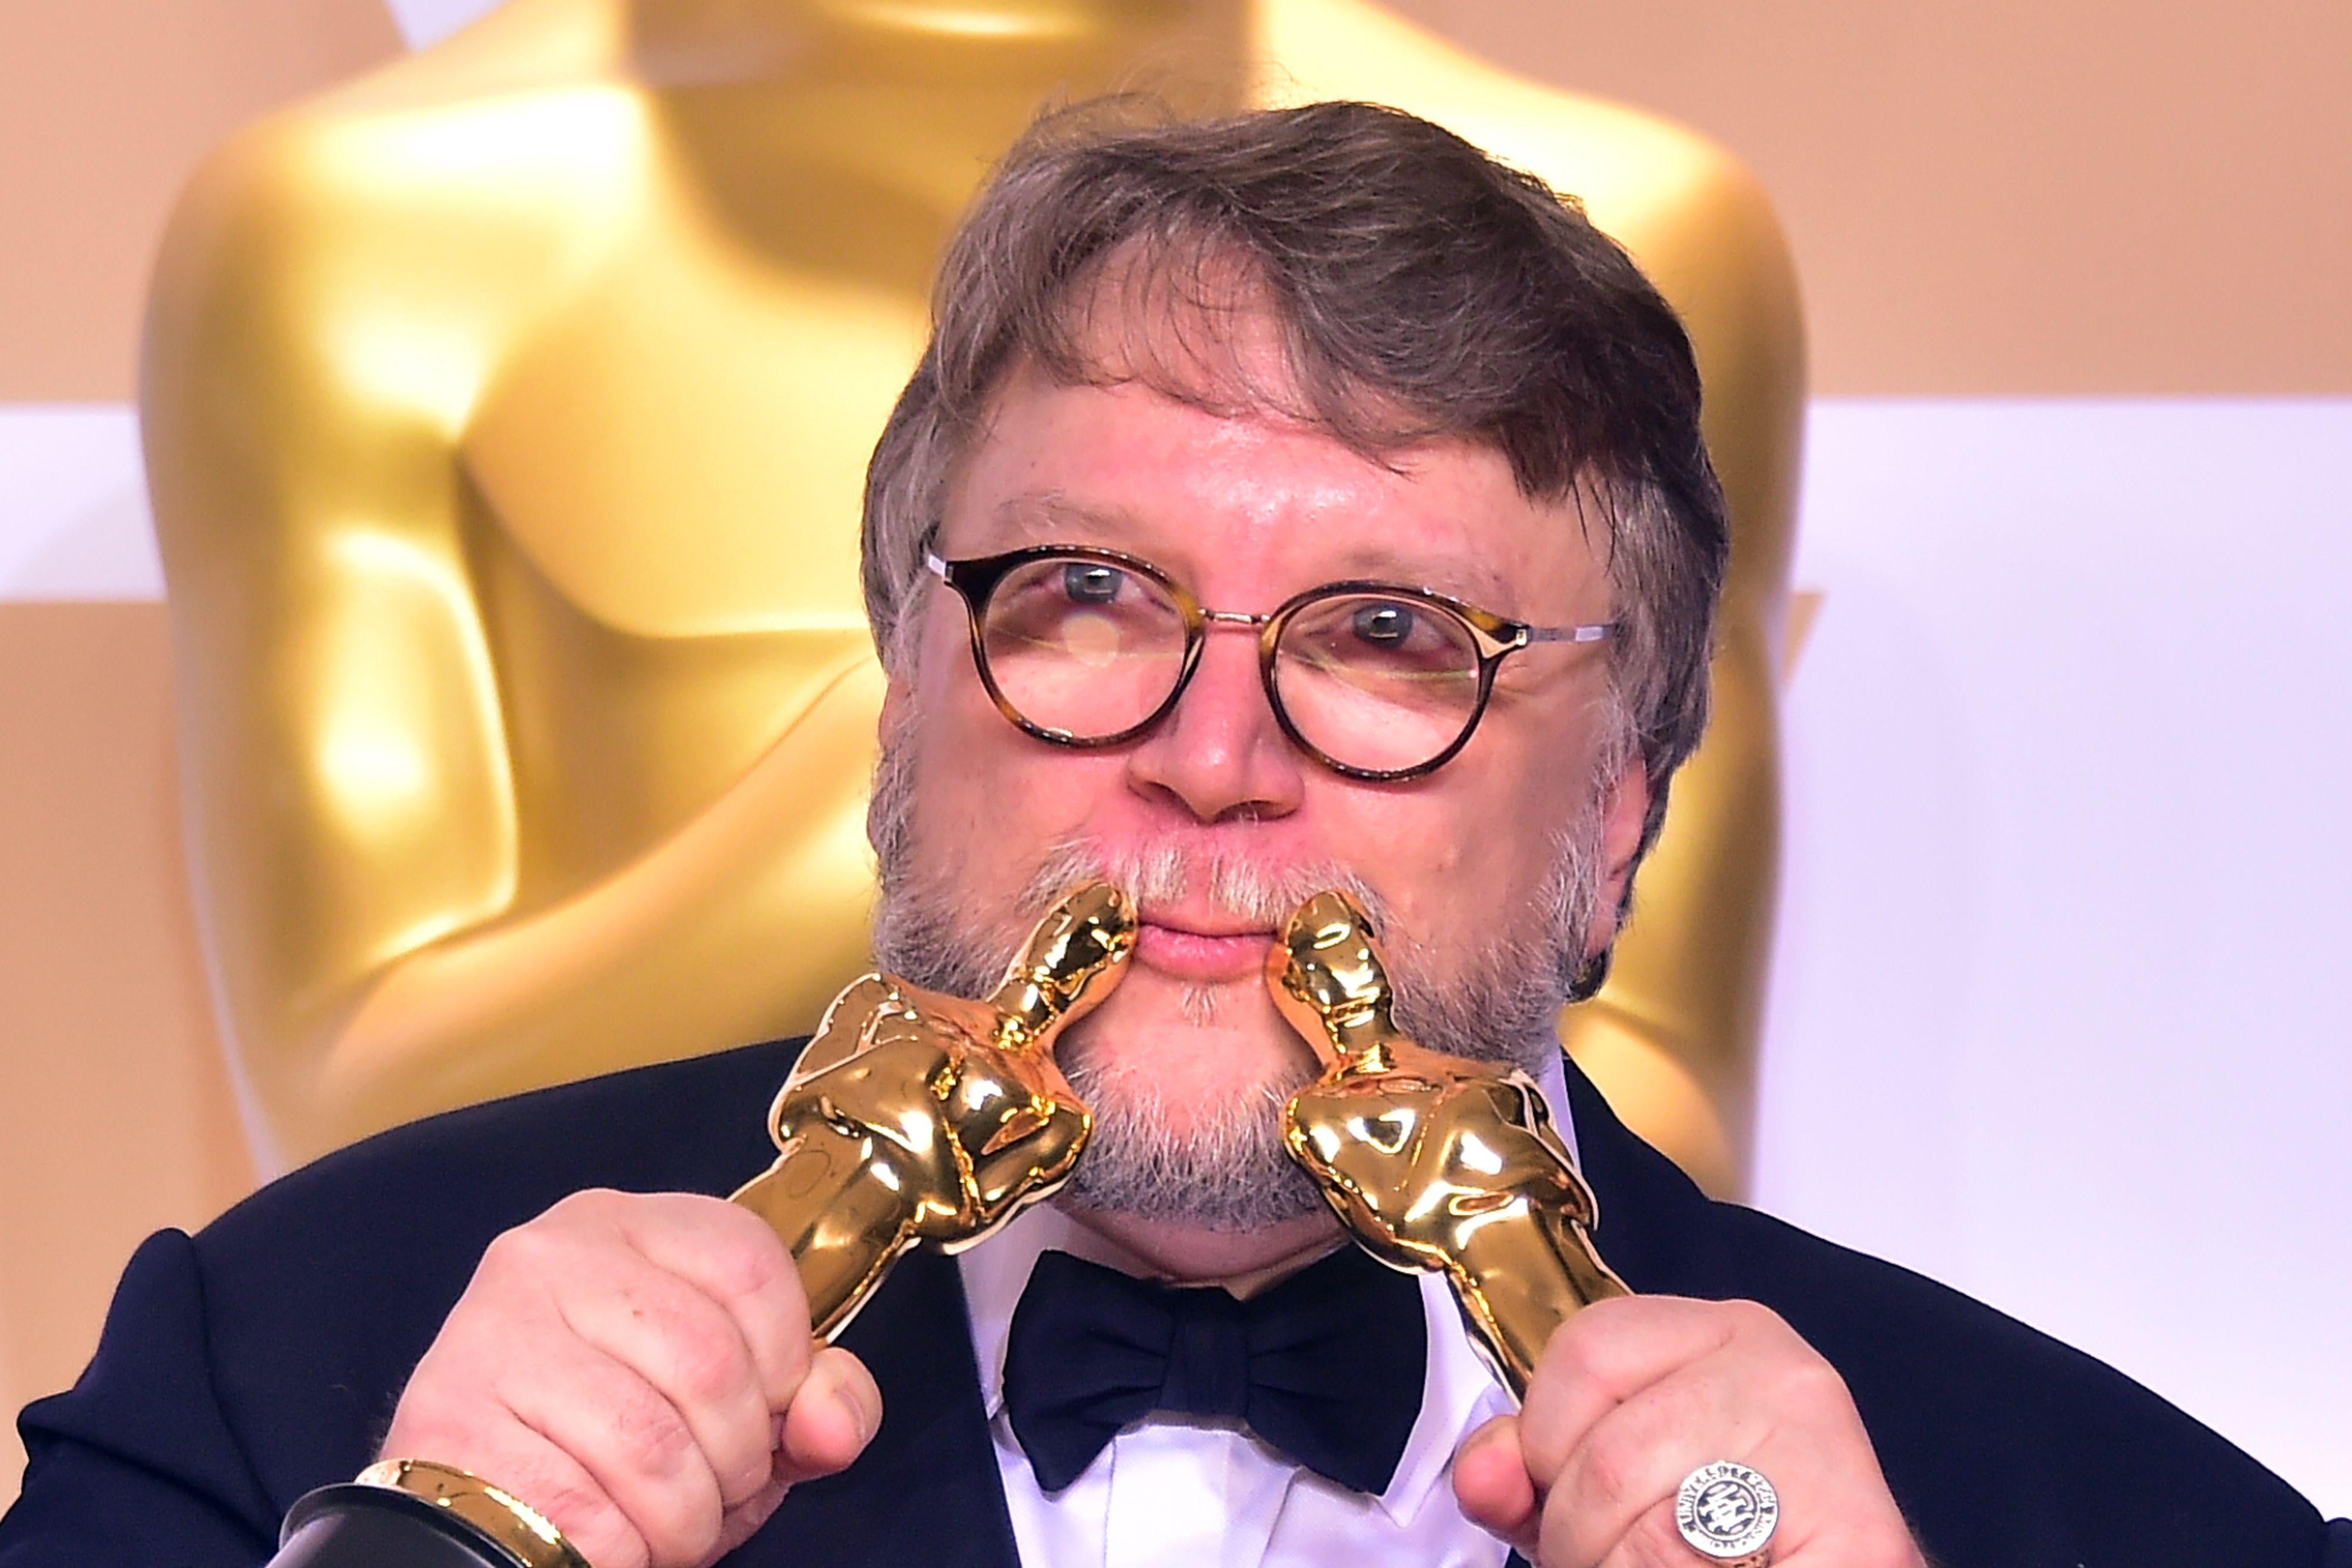 TOPSHOT - Director Guillermo del Toro poses in the press room with the Oscars for best picture and best director during the 90th Annual Academy Awards on March 4, 2018, in Hollywood, California.  / AFP PHOTO / FREDERIC J. BROWN        (Photo credit should read FREDERIC J. BROWN/AFP/Getty Images)